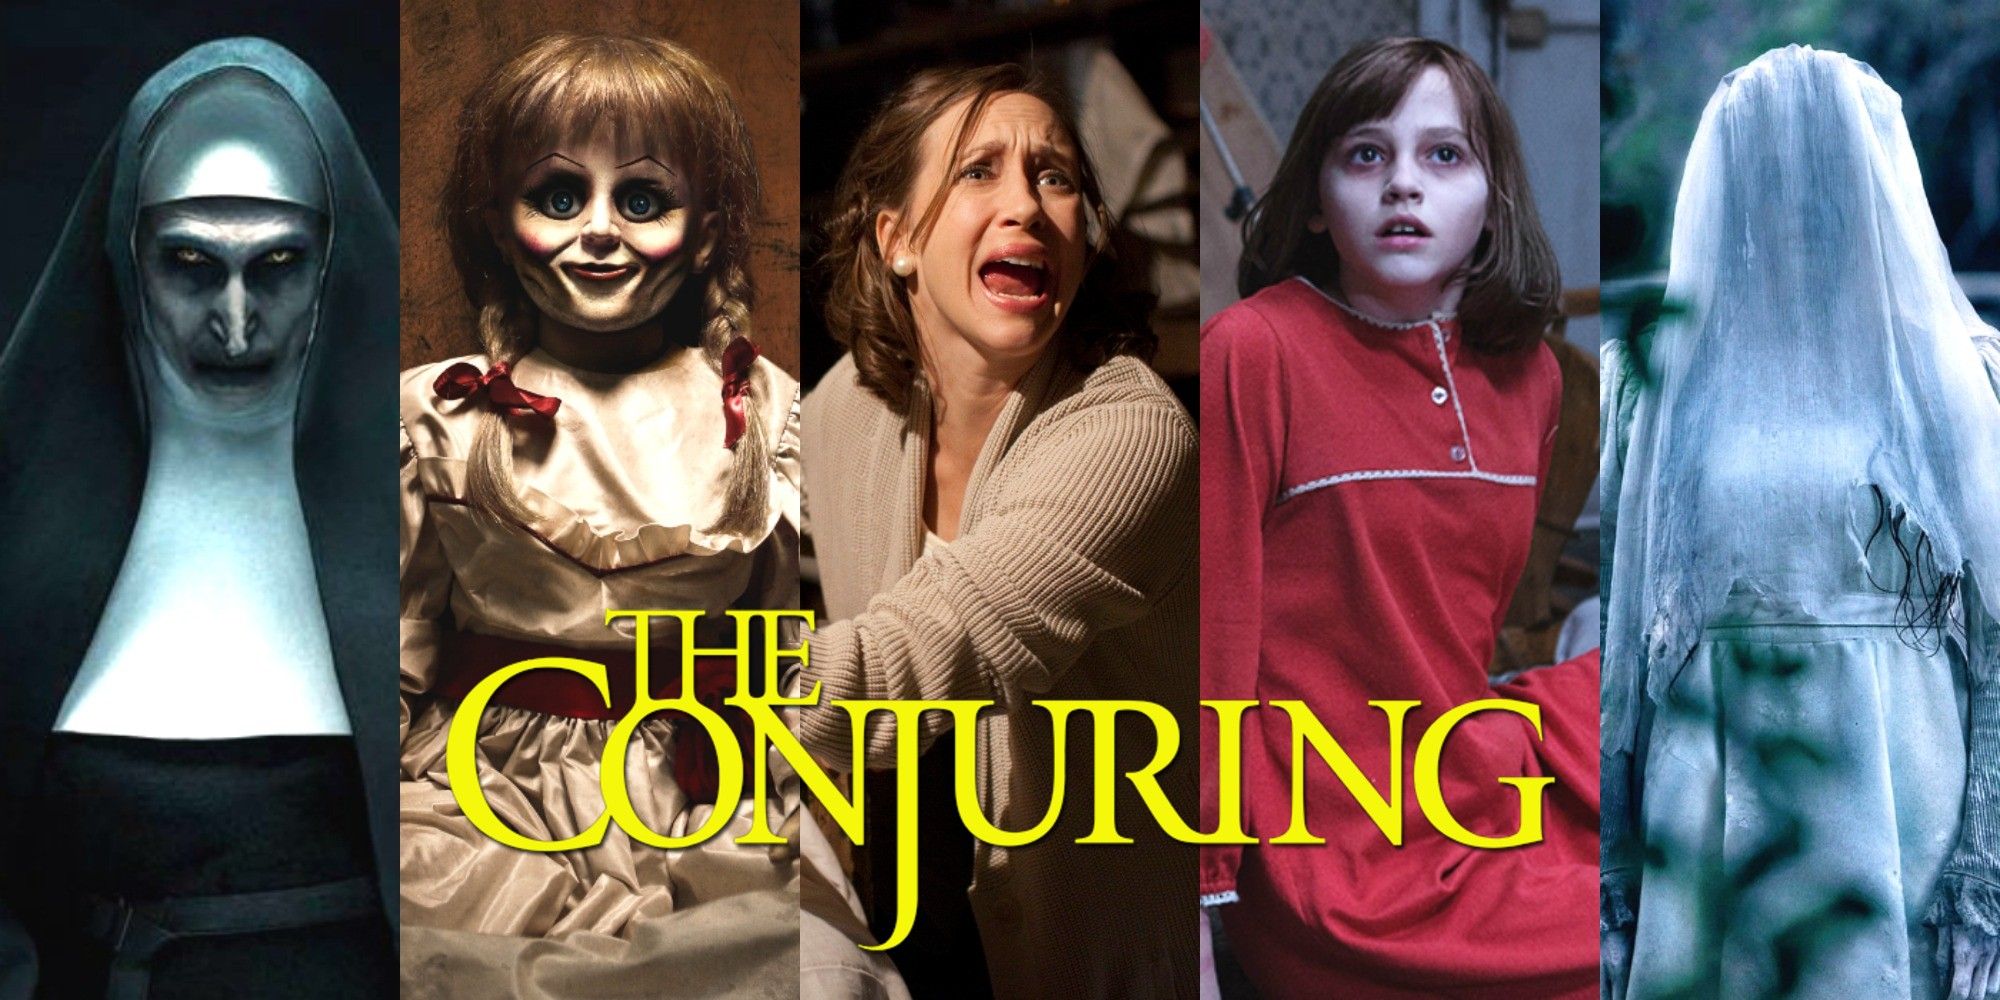 Split image of The Nun, Annabelle, Lorraine, Janet and La Llorona from the Conjuring universe with the logo on top